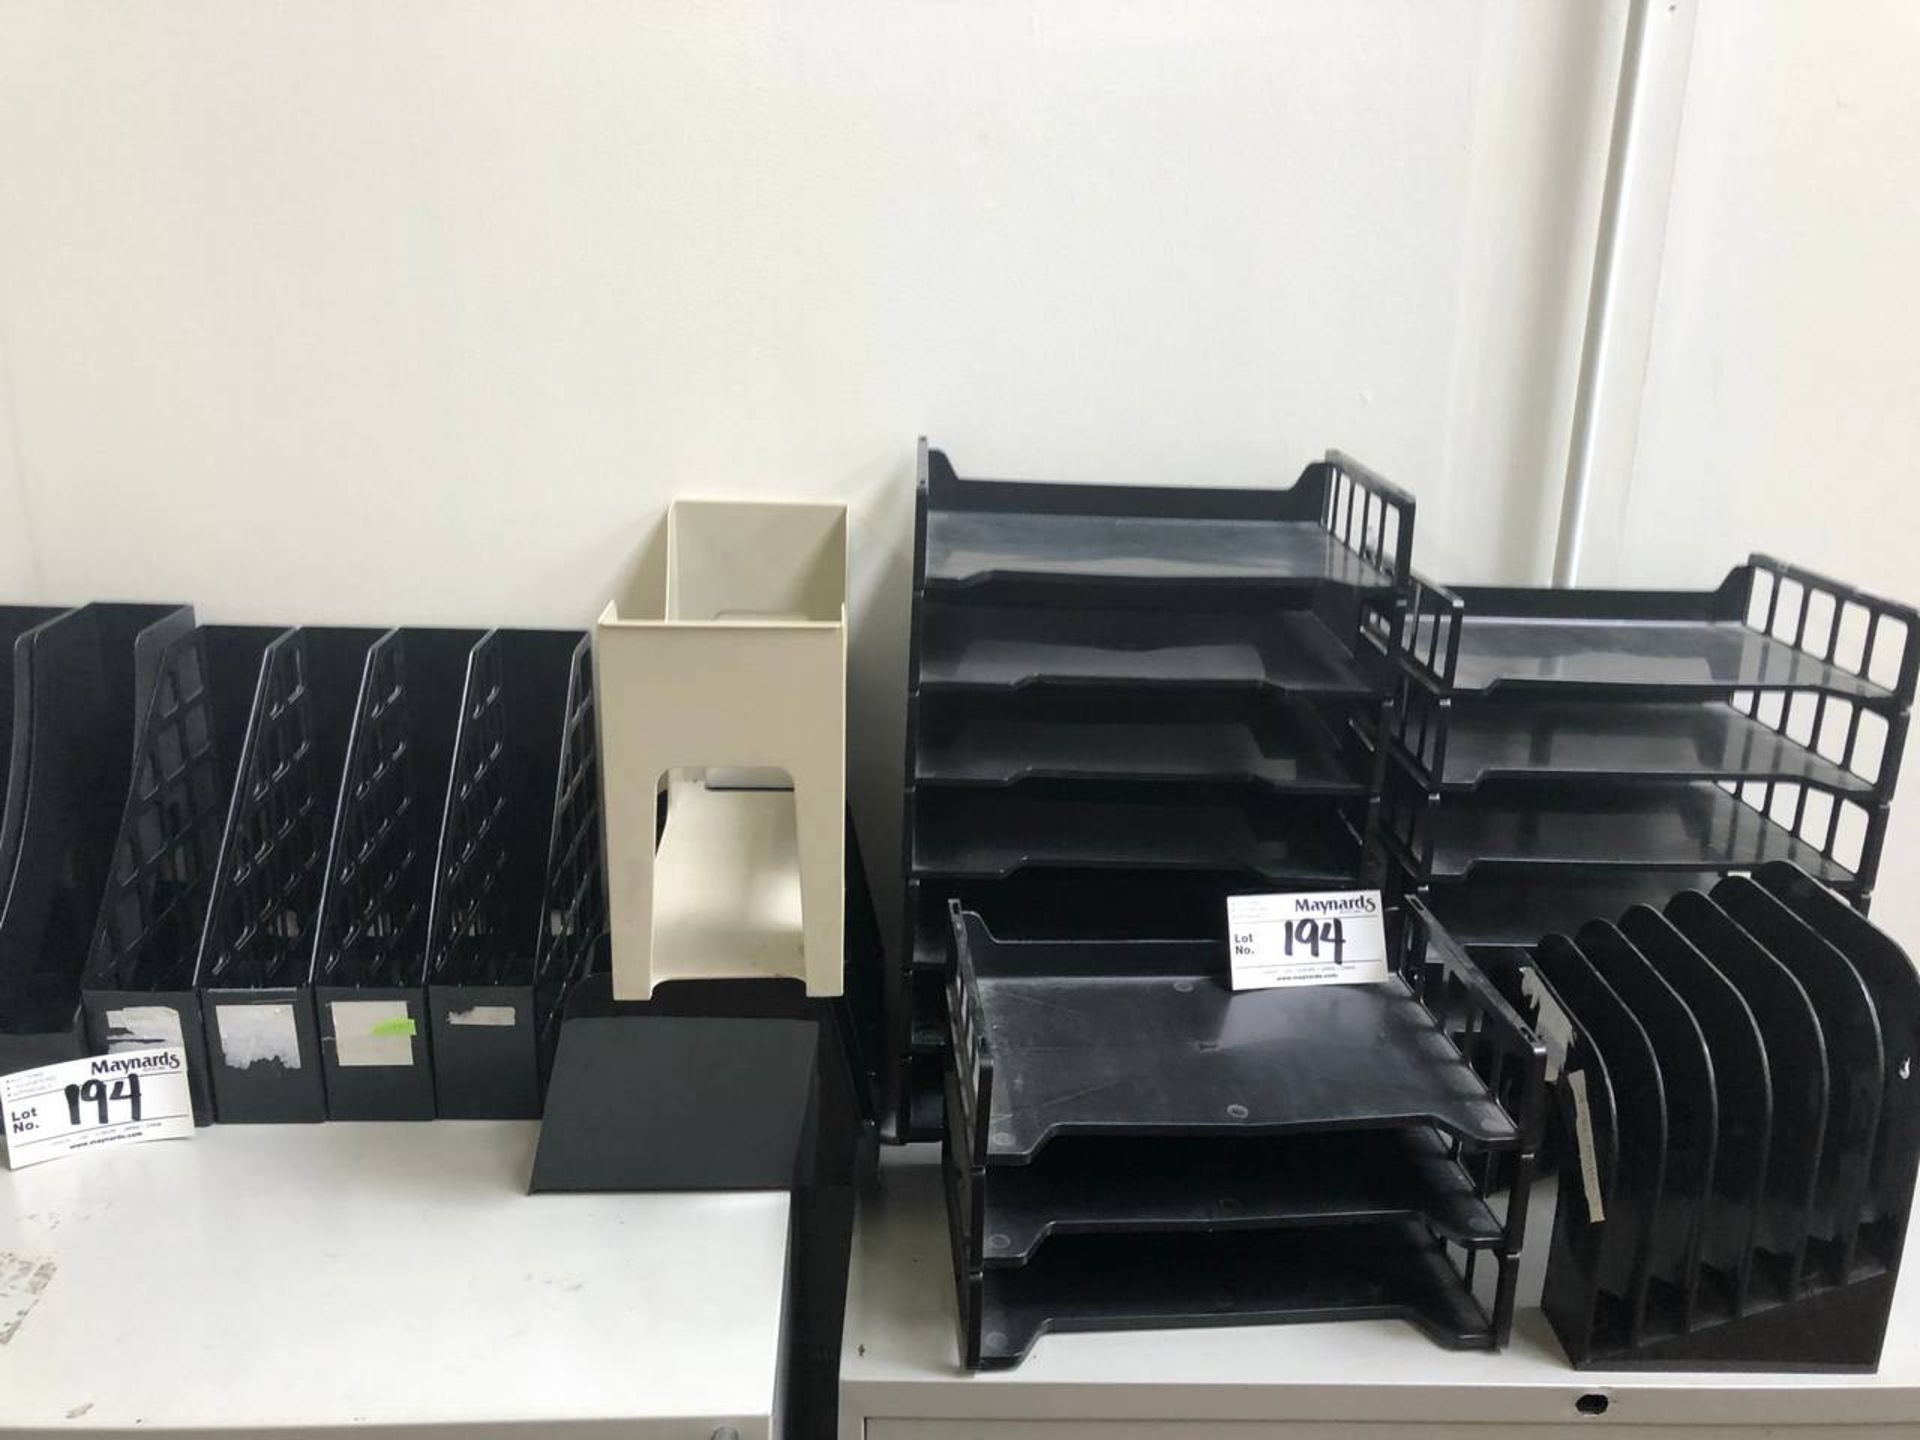 Lot of various file organizers, paper and office supplies